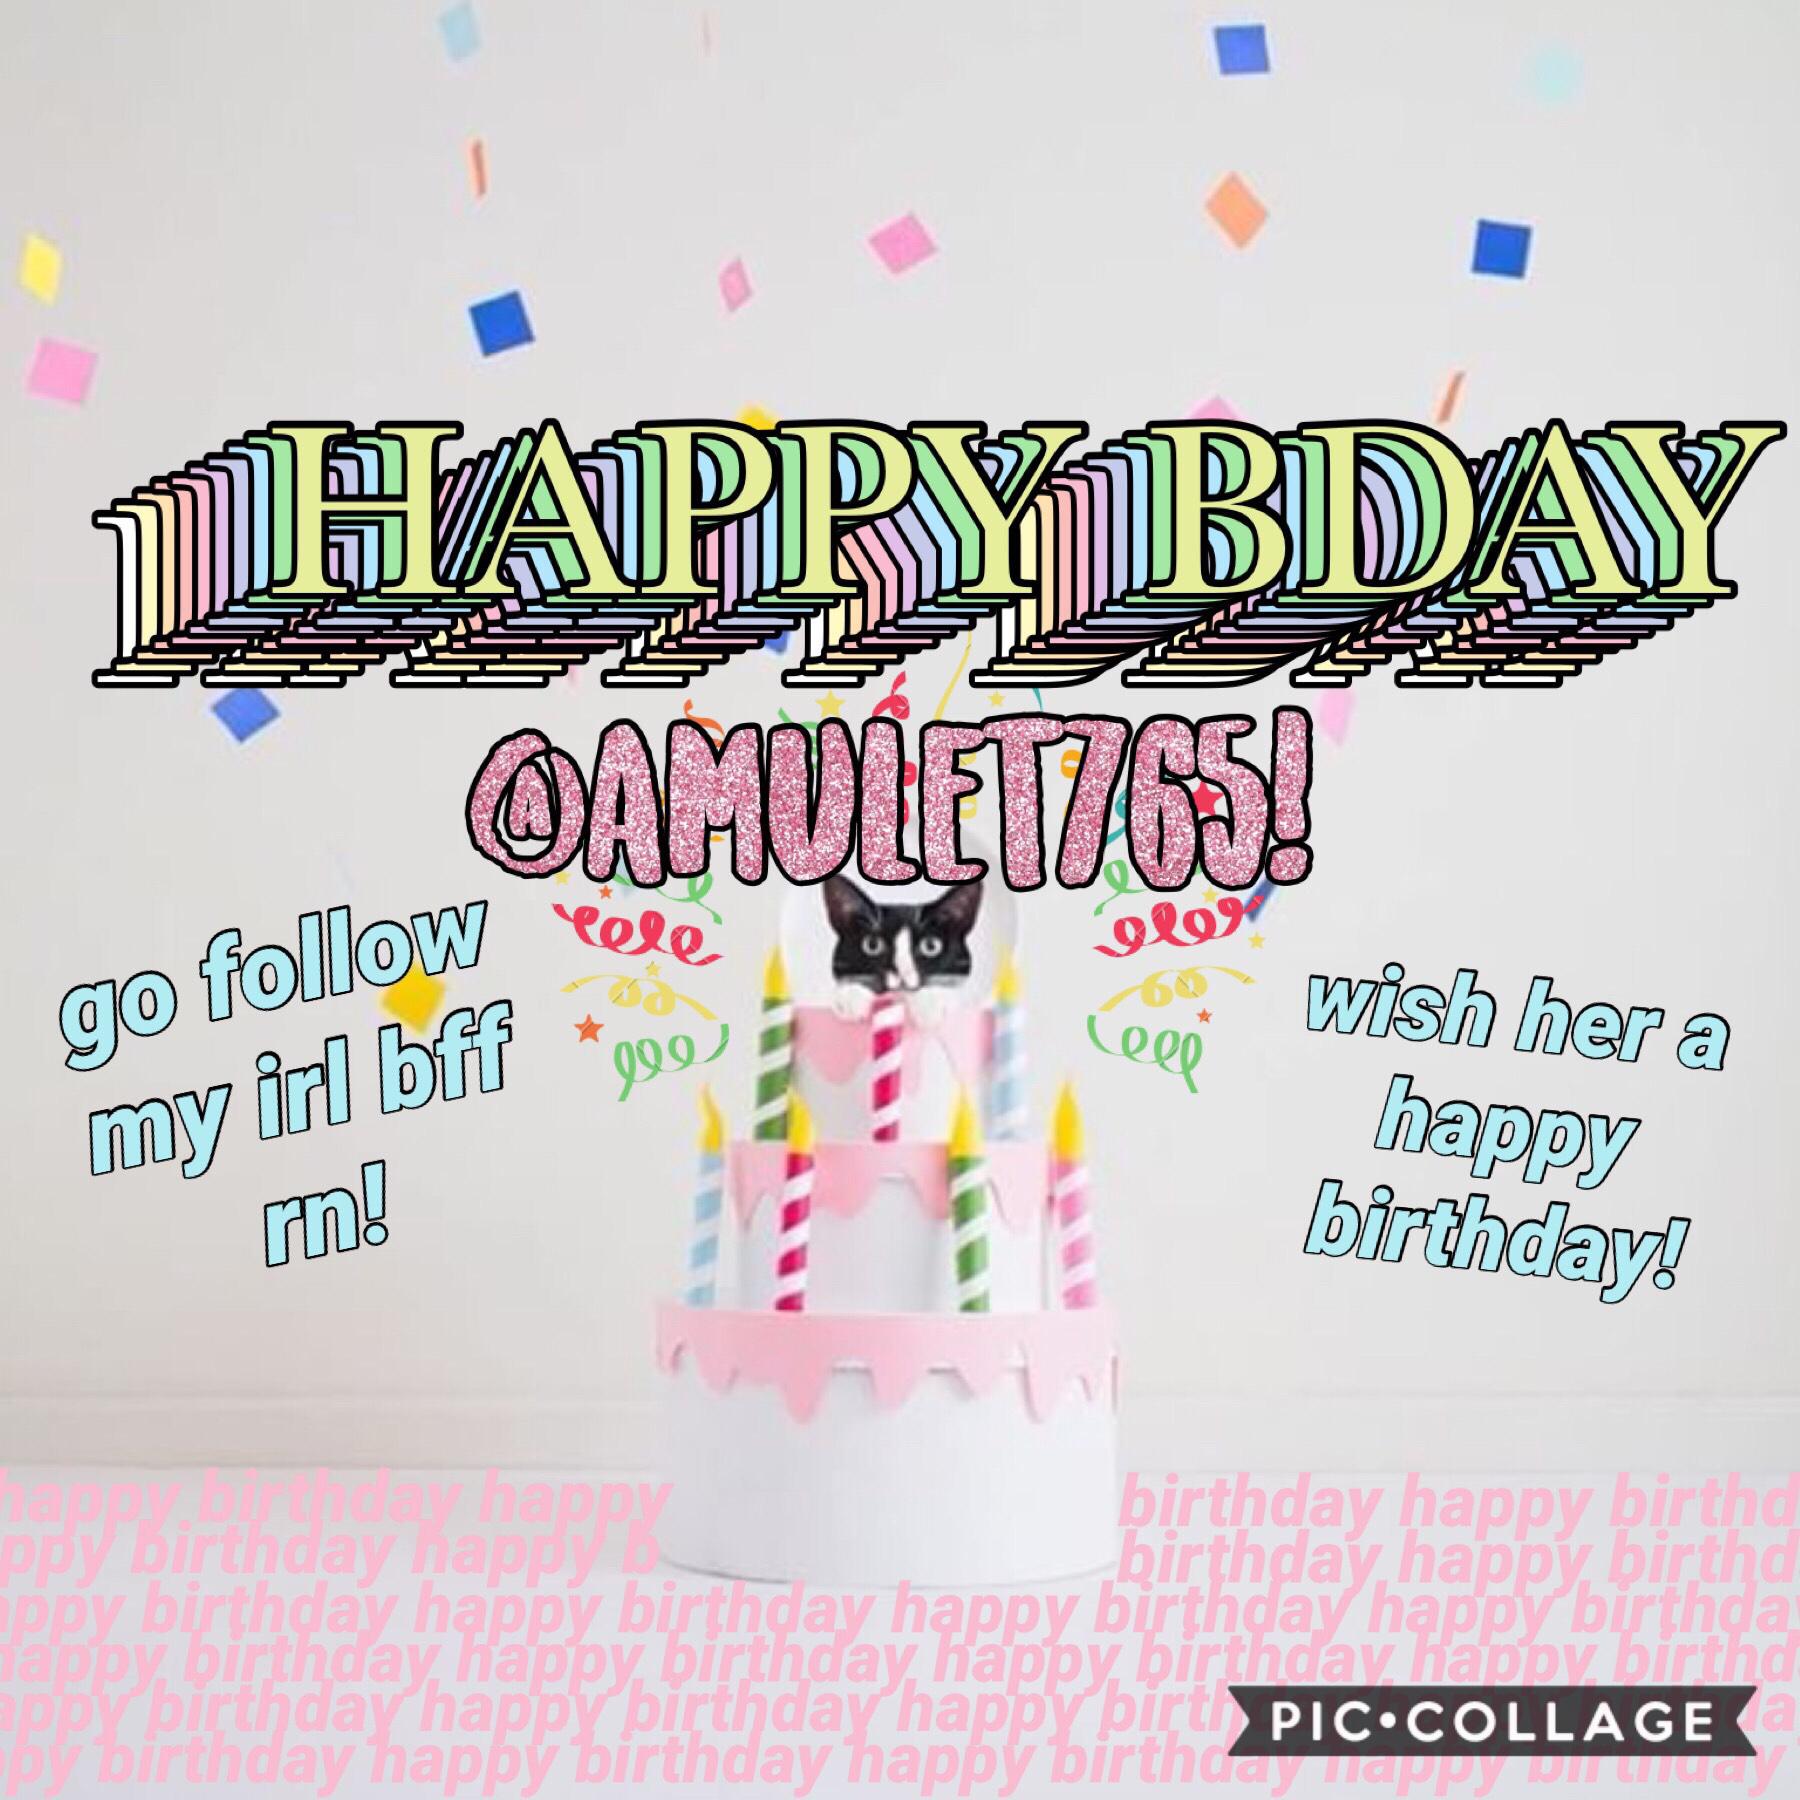 🥳happy birthday my bestie!!🥳 go follow @amulet765 rn if you haven’t already and wish her the happiest bday!🎉🌿 (17.2.19)